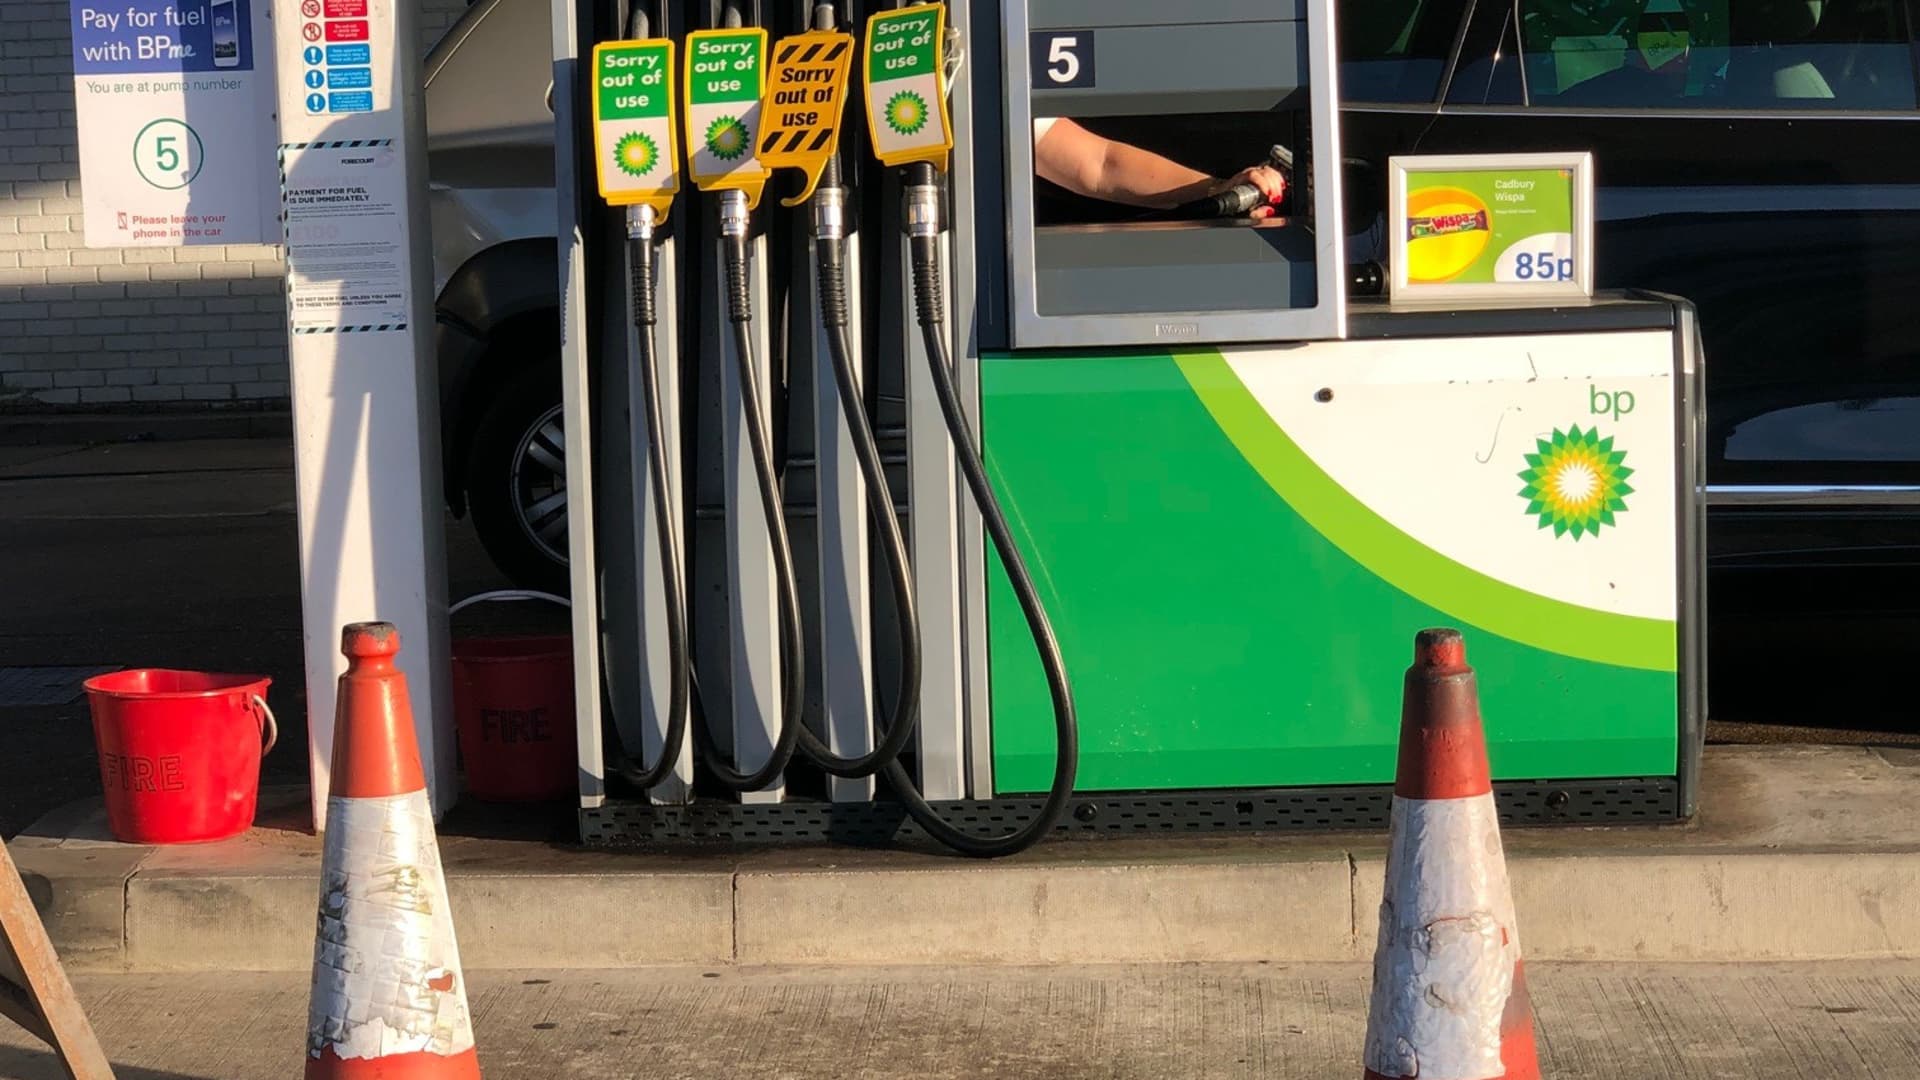 Gasoline pumps out of use as drivers panic buy fuel at a BP gas station in southeast London, U.K., on 26 September 2021.